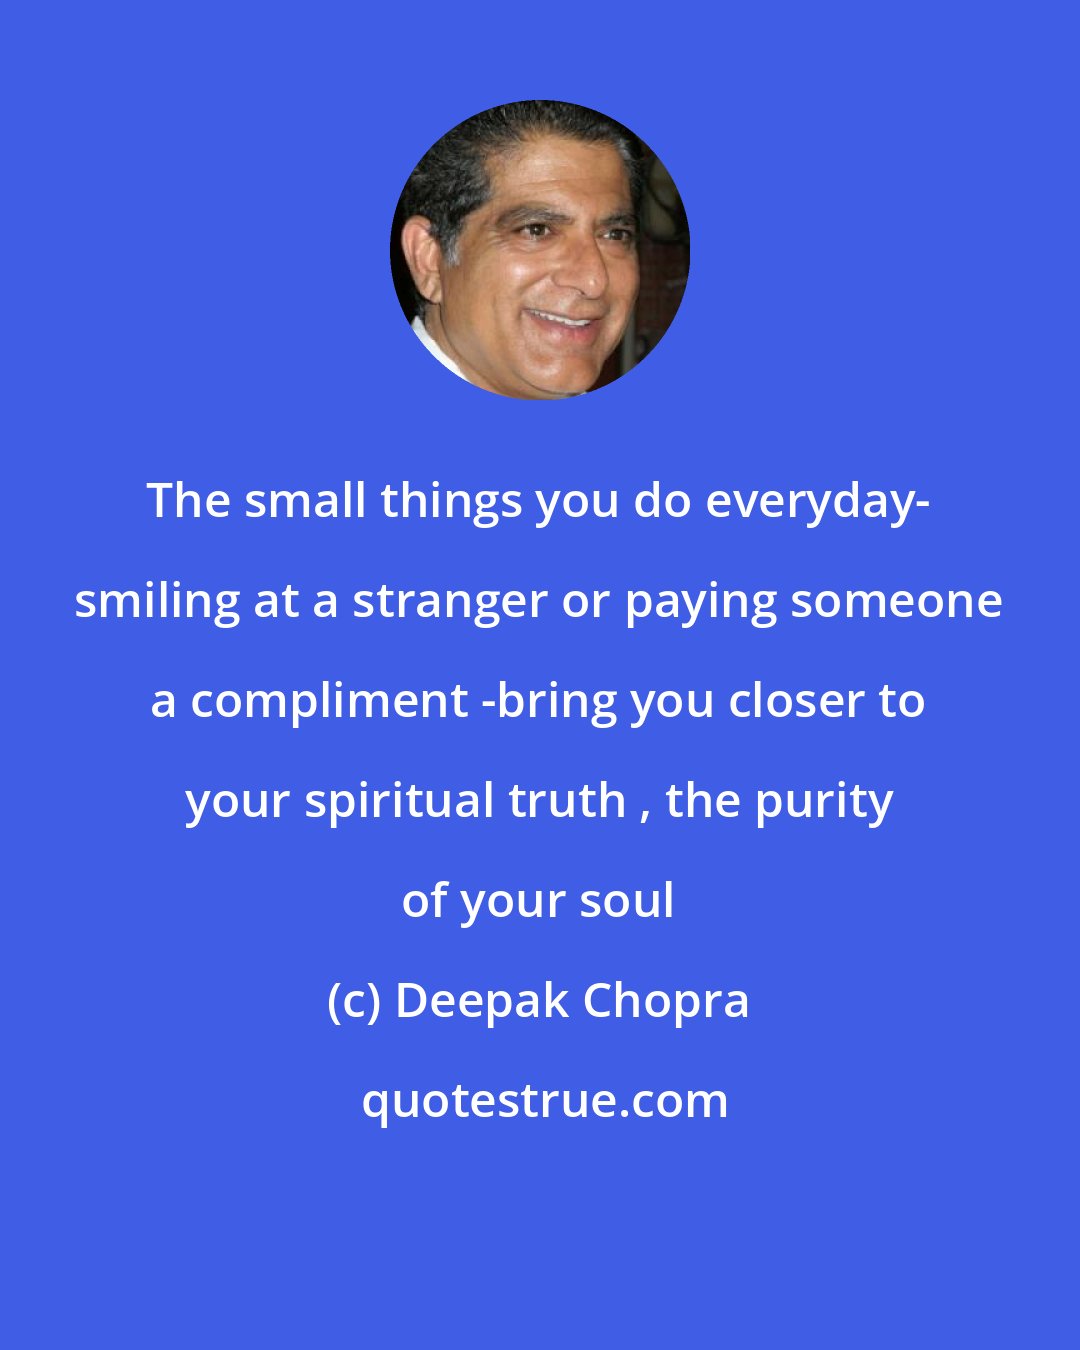 Deepak Chopra: The small things you do everyday- smiling at a stranger or paying someone a compliment -bring you closer to your spiritual truth , the purity of your soul